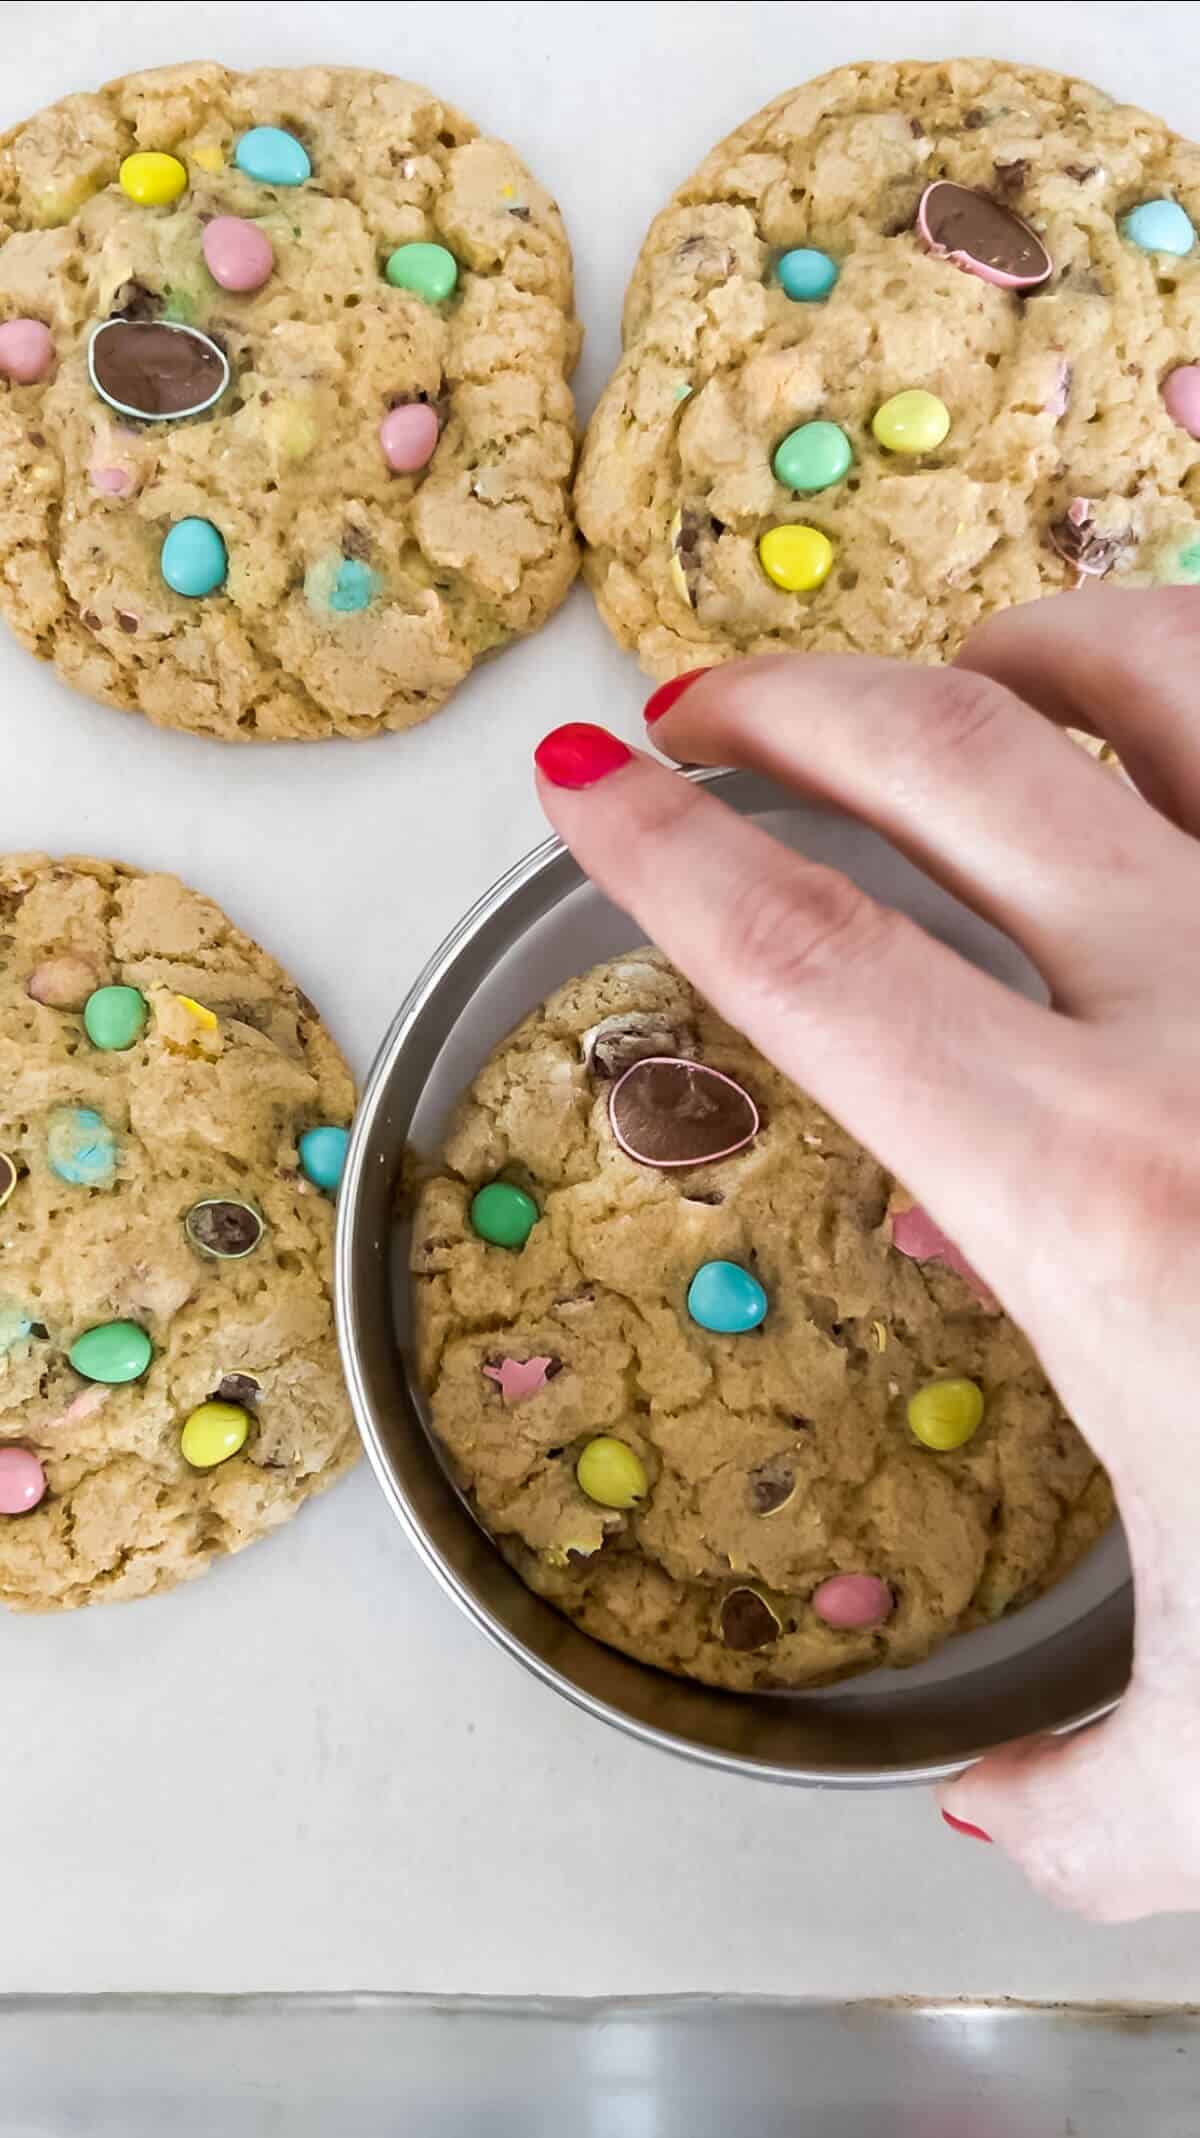 Using a large round cookie cutter to tighten the edges of a cookie that spread in the oven.